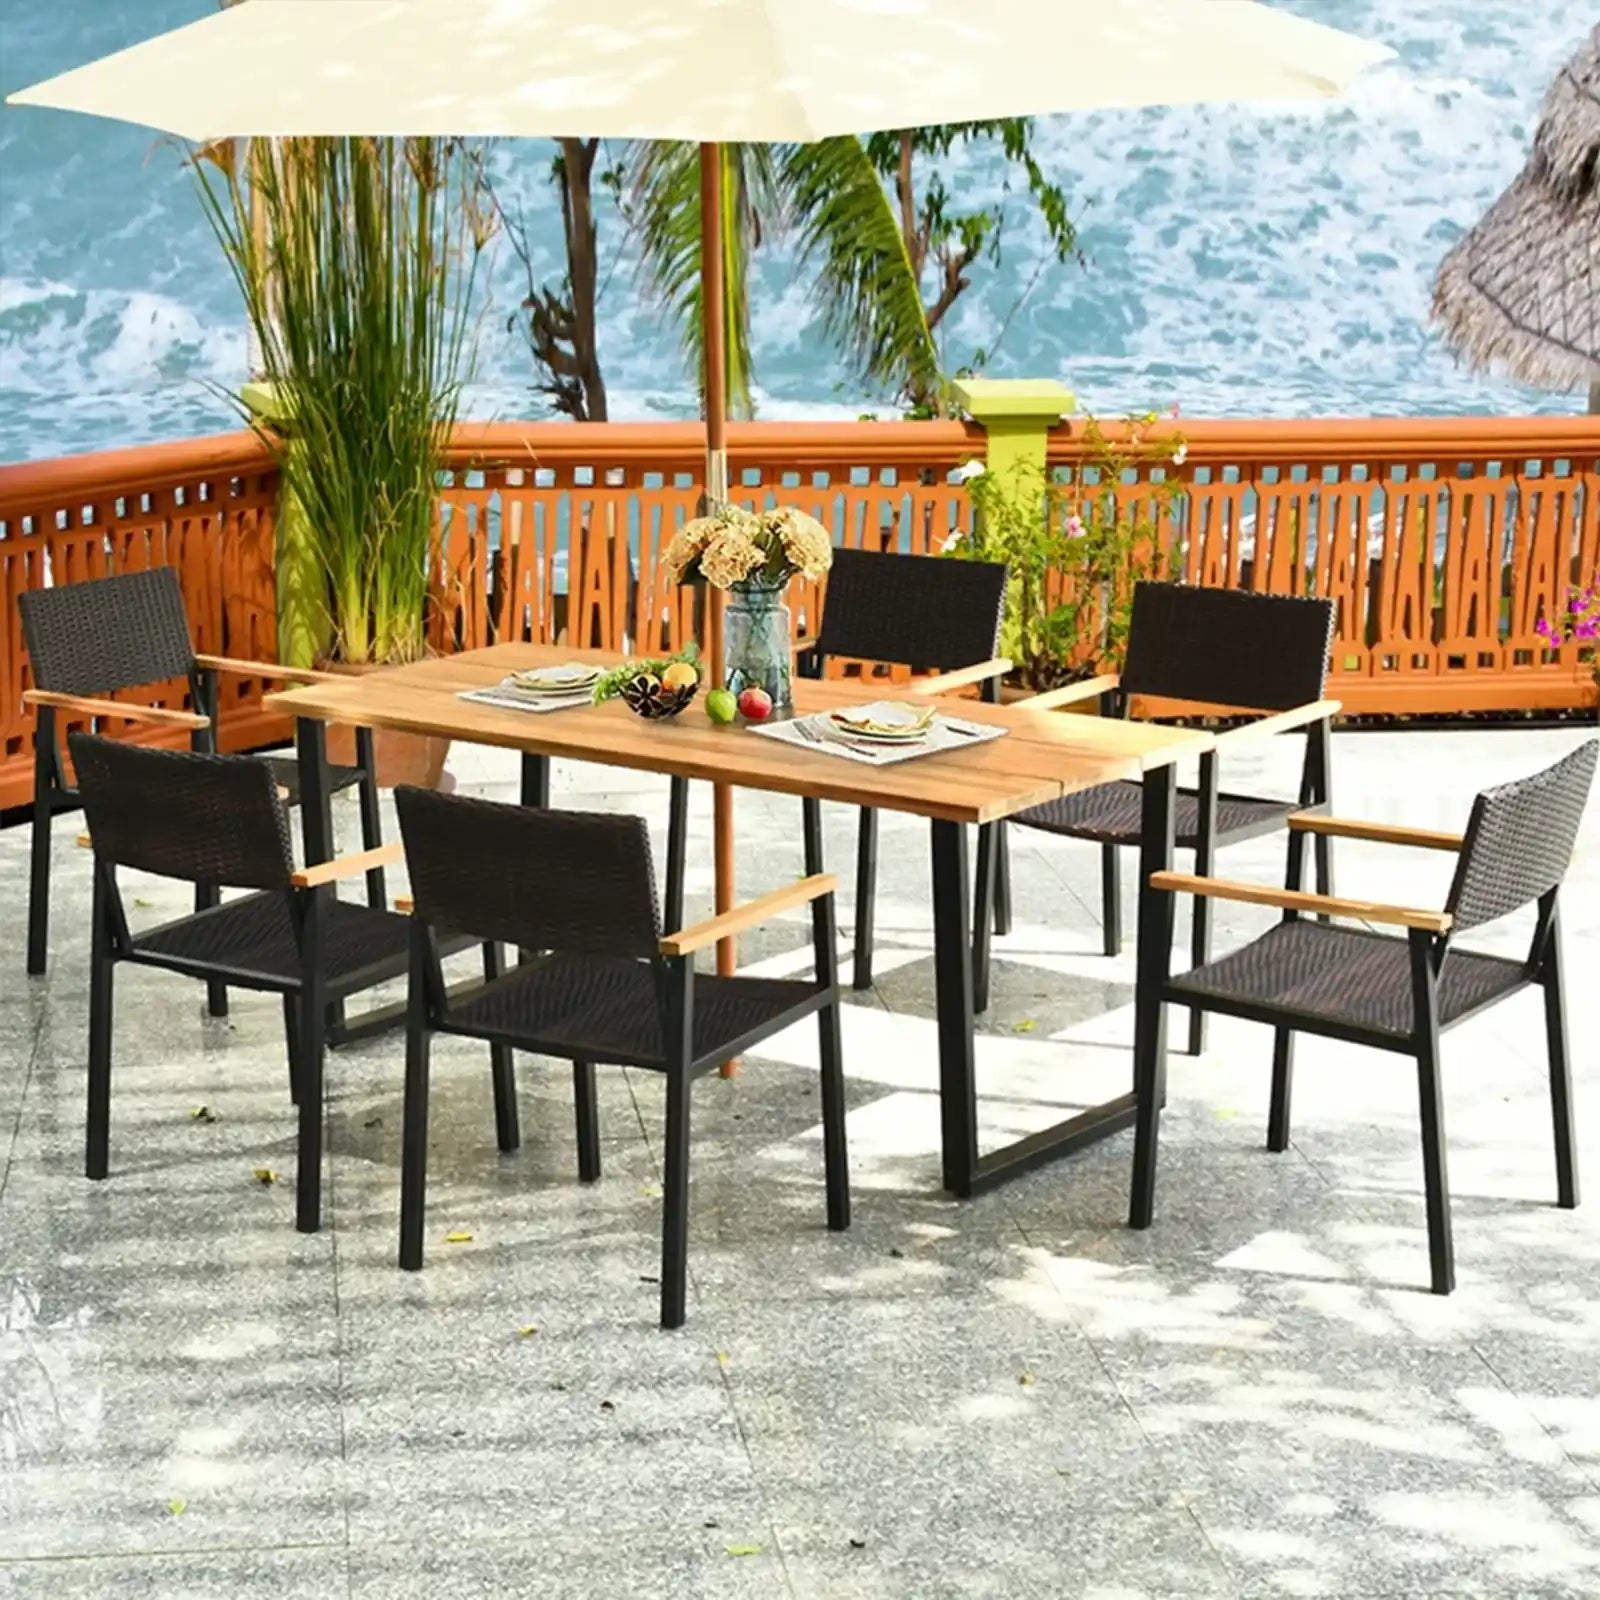 Stylish and Durable Outdoor Dining Set | Weather-Resistant Furniture for Gardens, Patios, and Poolside | 7-Piece Set with Umbrella Hole